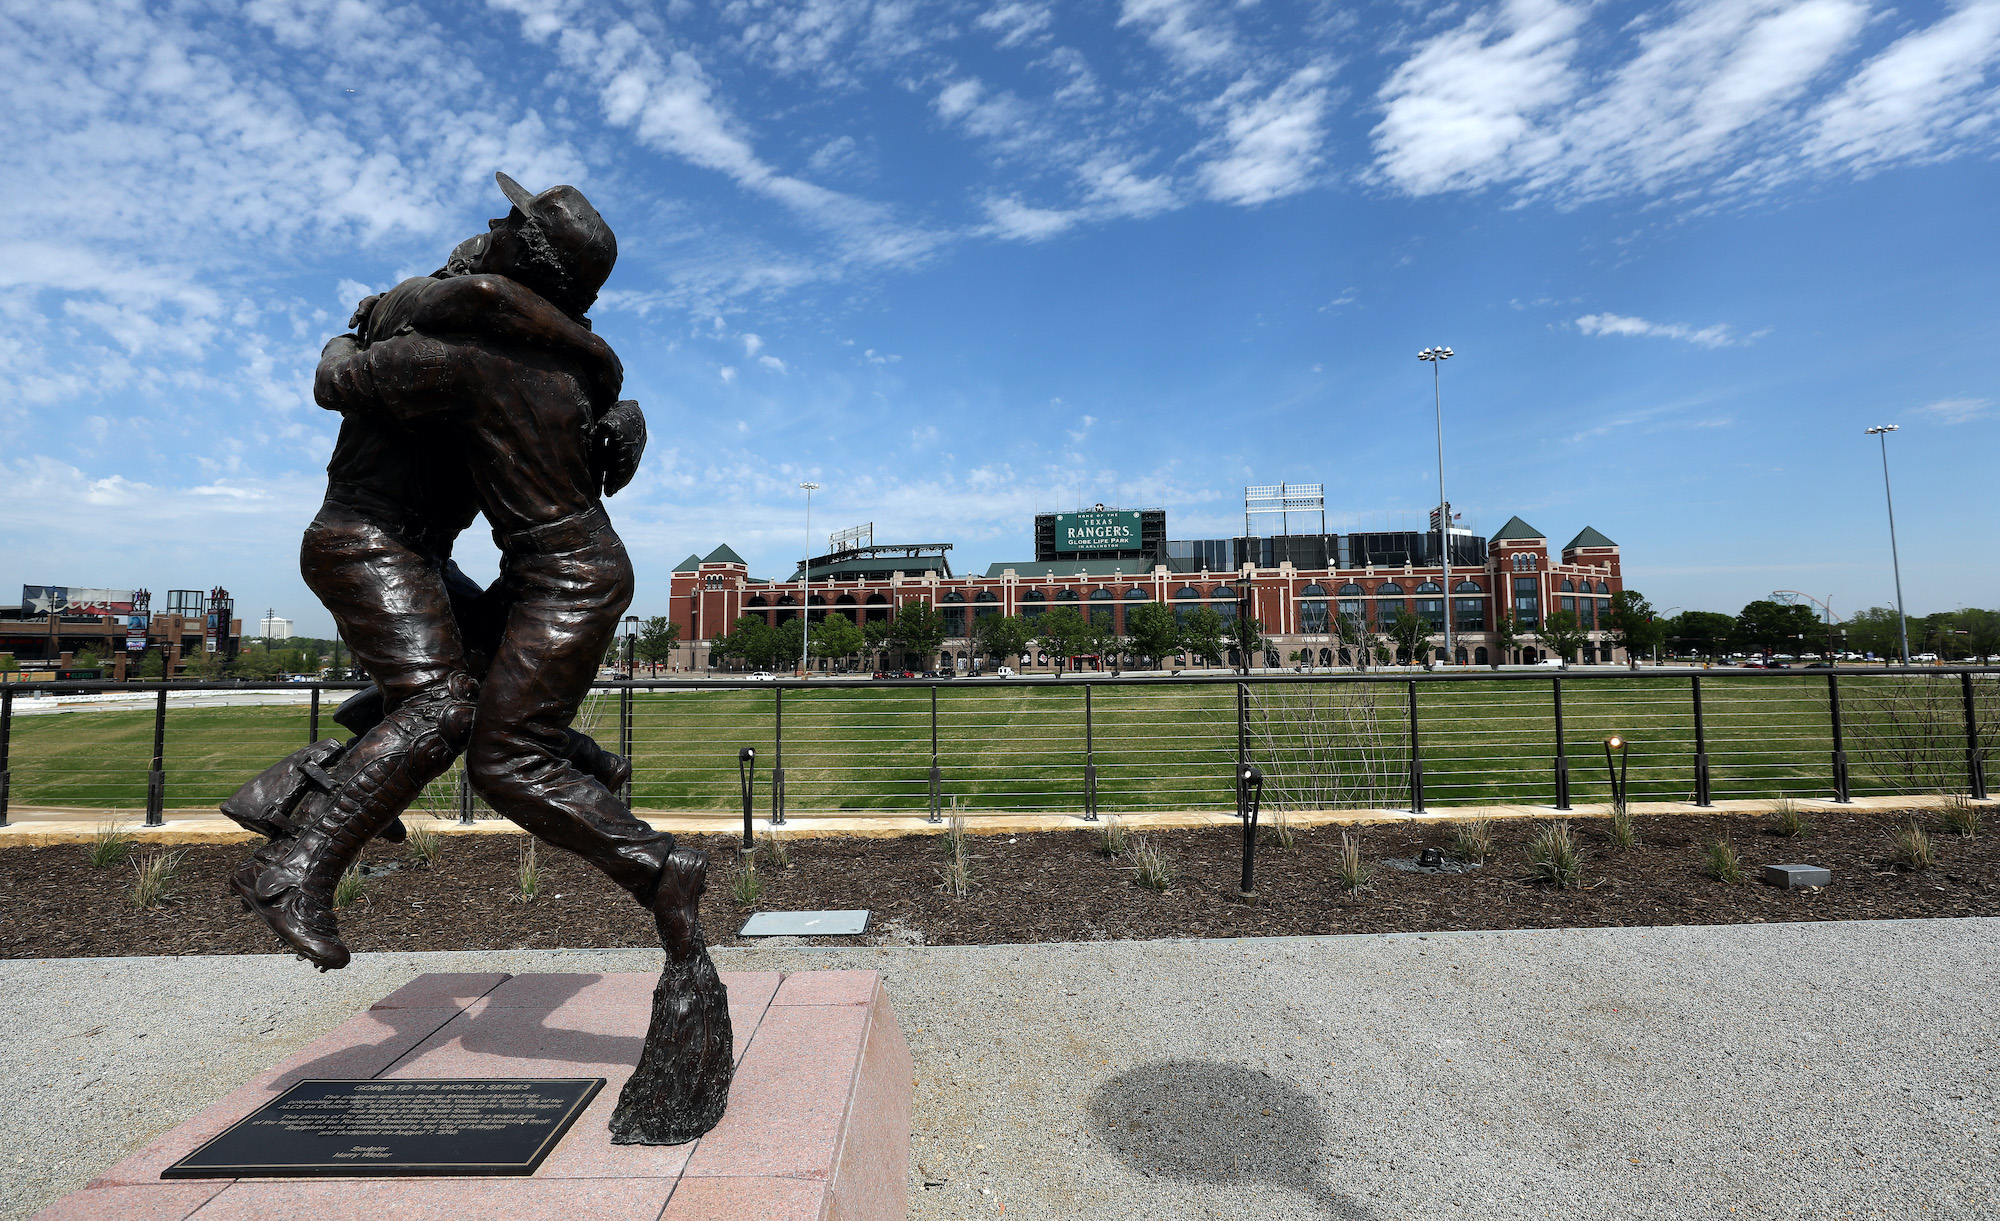 ARLINGTON, TEXAS - MARCH 26: The "Going to the World Series" sculpture by Harry Weber is seen in front of Globe Life Park, the prior home of the Texas Rangers on March 26, 2020 in Arlington, Texas. The Rangers had to delay their March 31, 2020 debut opening of Globe Life Field after Major League Baseball postponed the start of its season due to the COVID-19 outbreak. (Photo by Ronald Martinez/Getty Images)